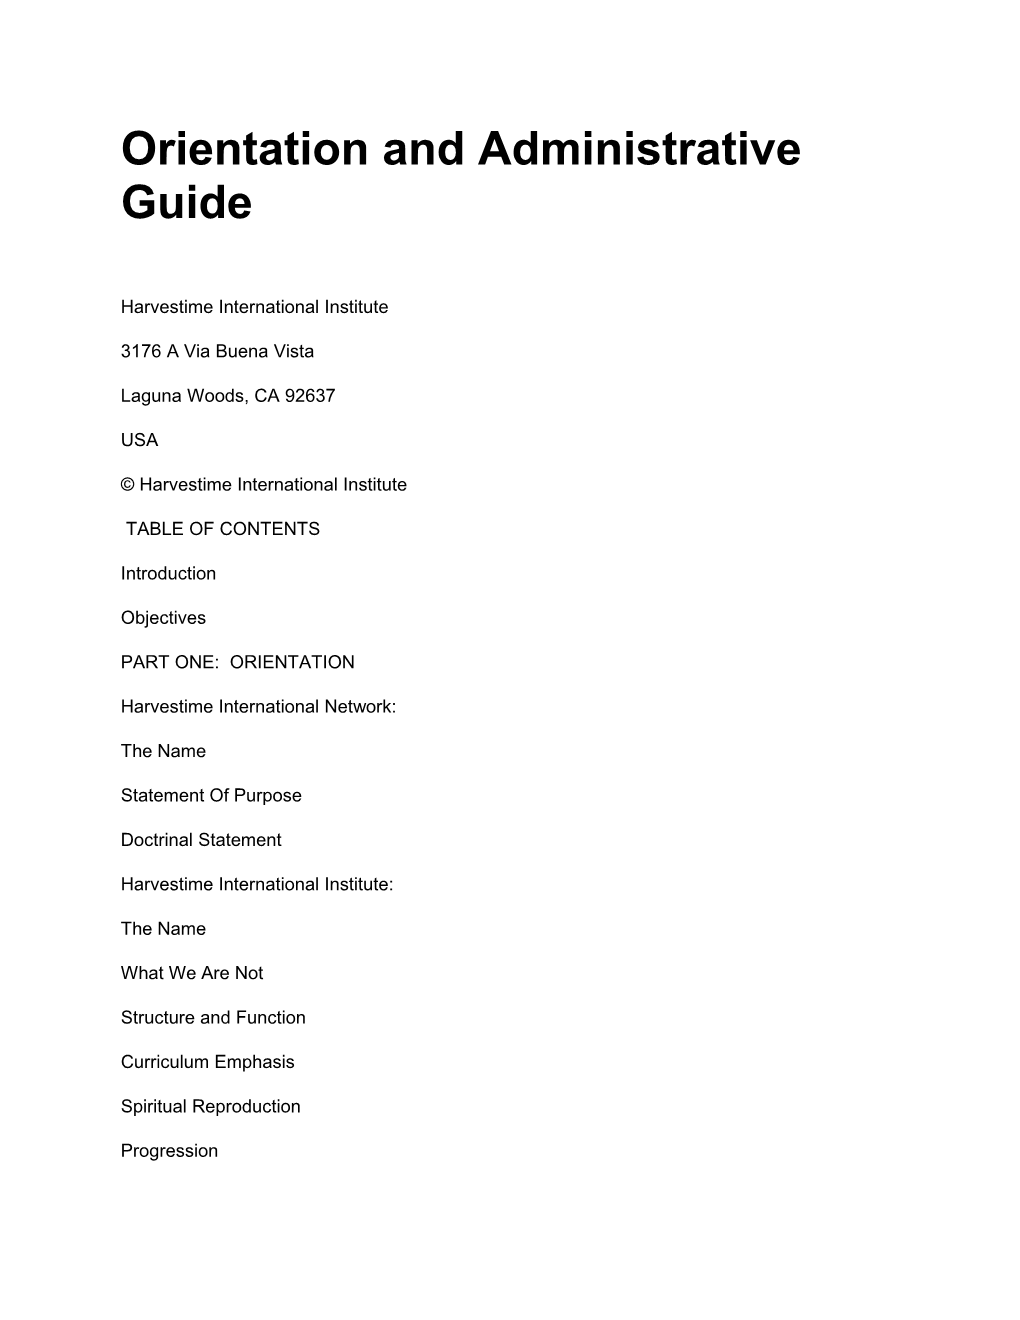 Orientation and Administrative Guide